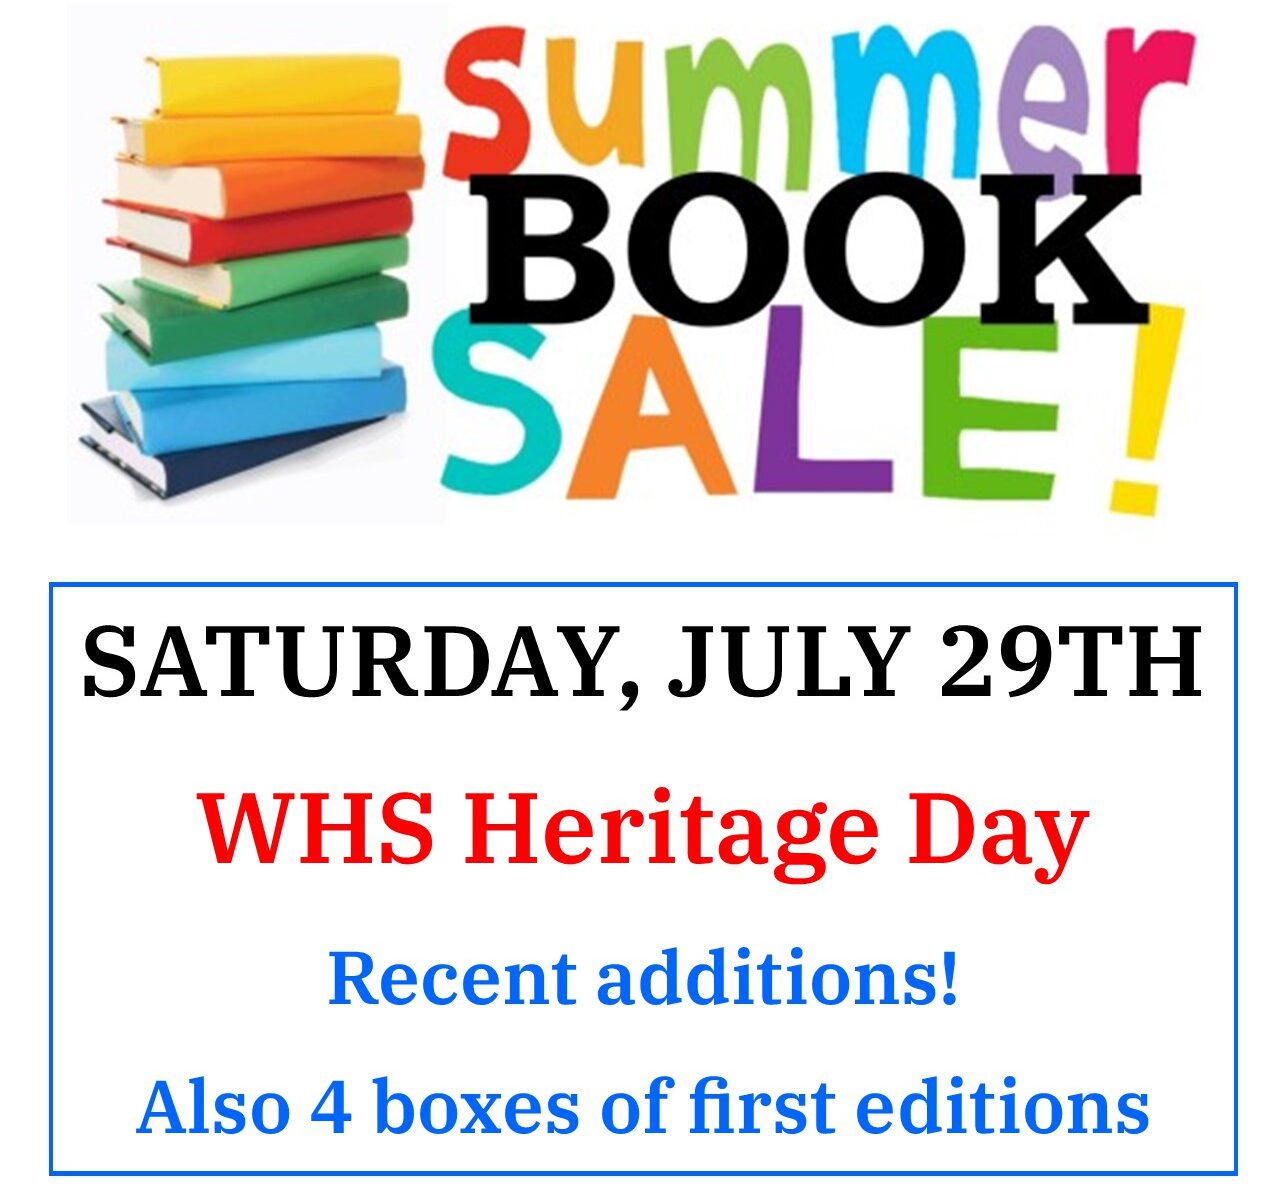 Heritage Day book sale